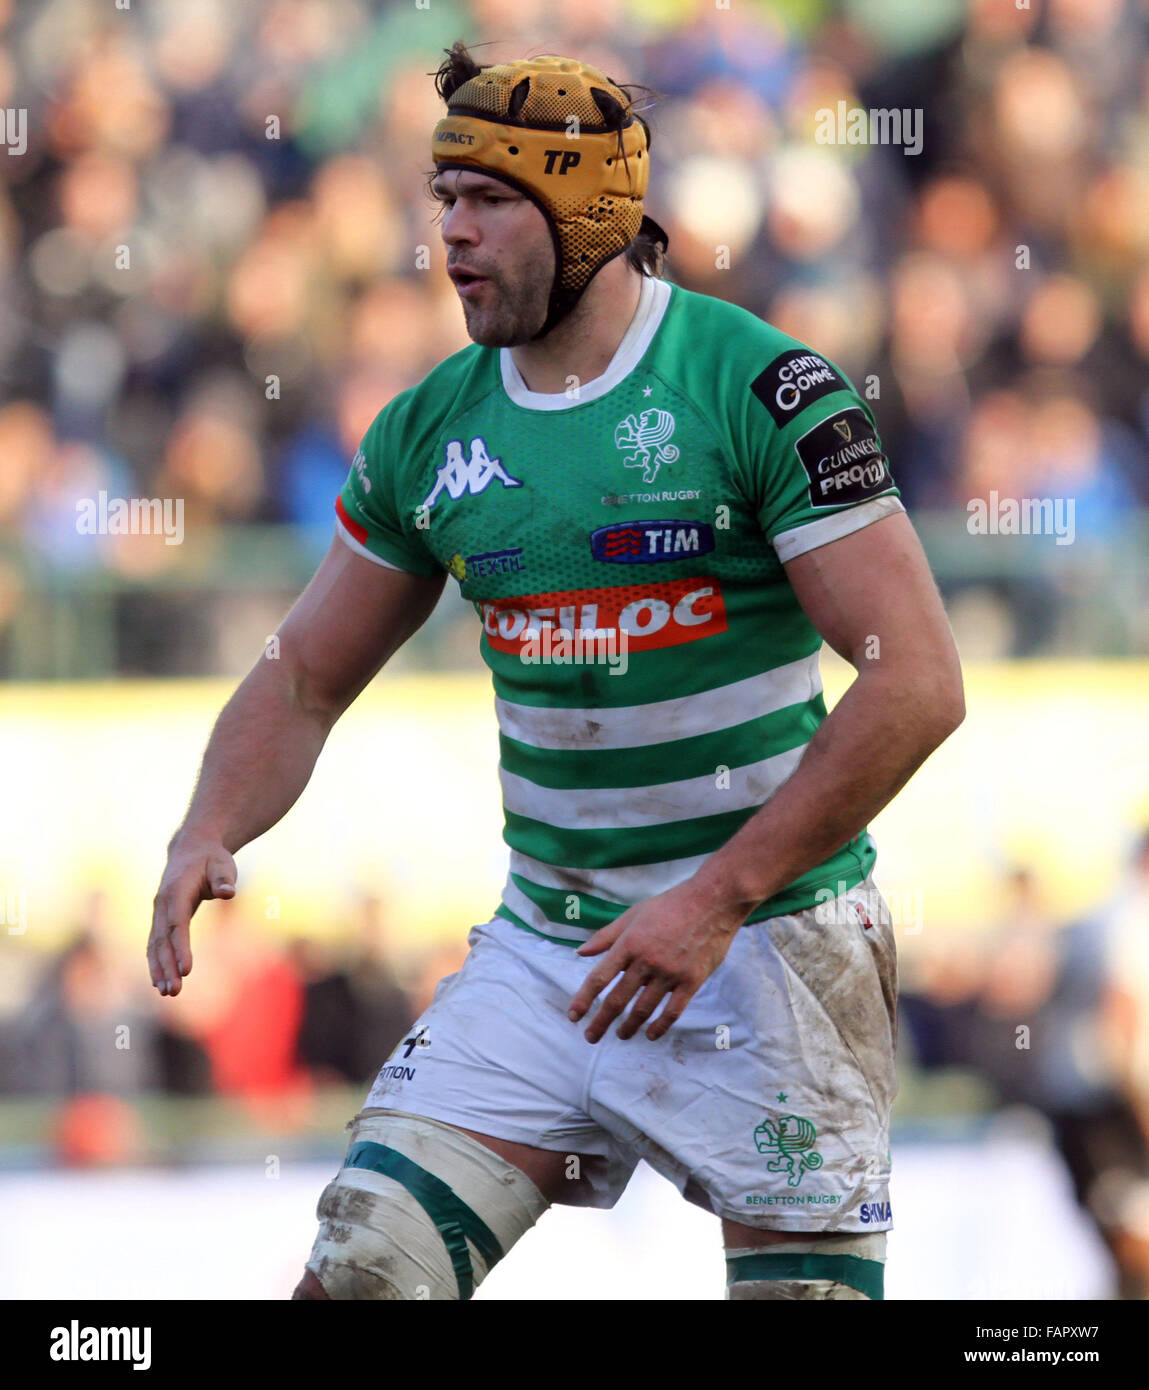 ITALY, Treviso: Benetton Treviso's player Tom Palmer looks during Rugby  Guinness Pro12 match between Benetton Treviso and Zebre Rugby on 3rd  January, 2016 in Treviso Stock Photo - Alamy